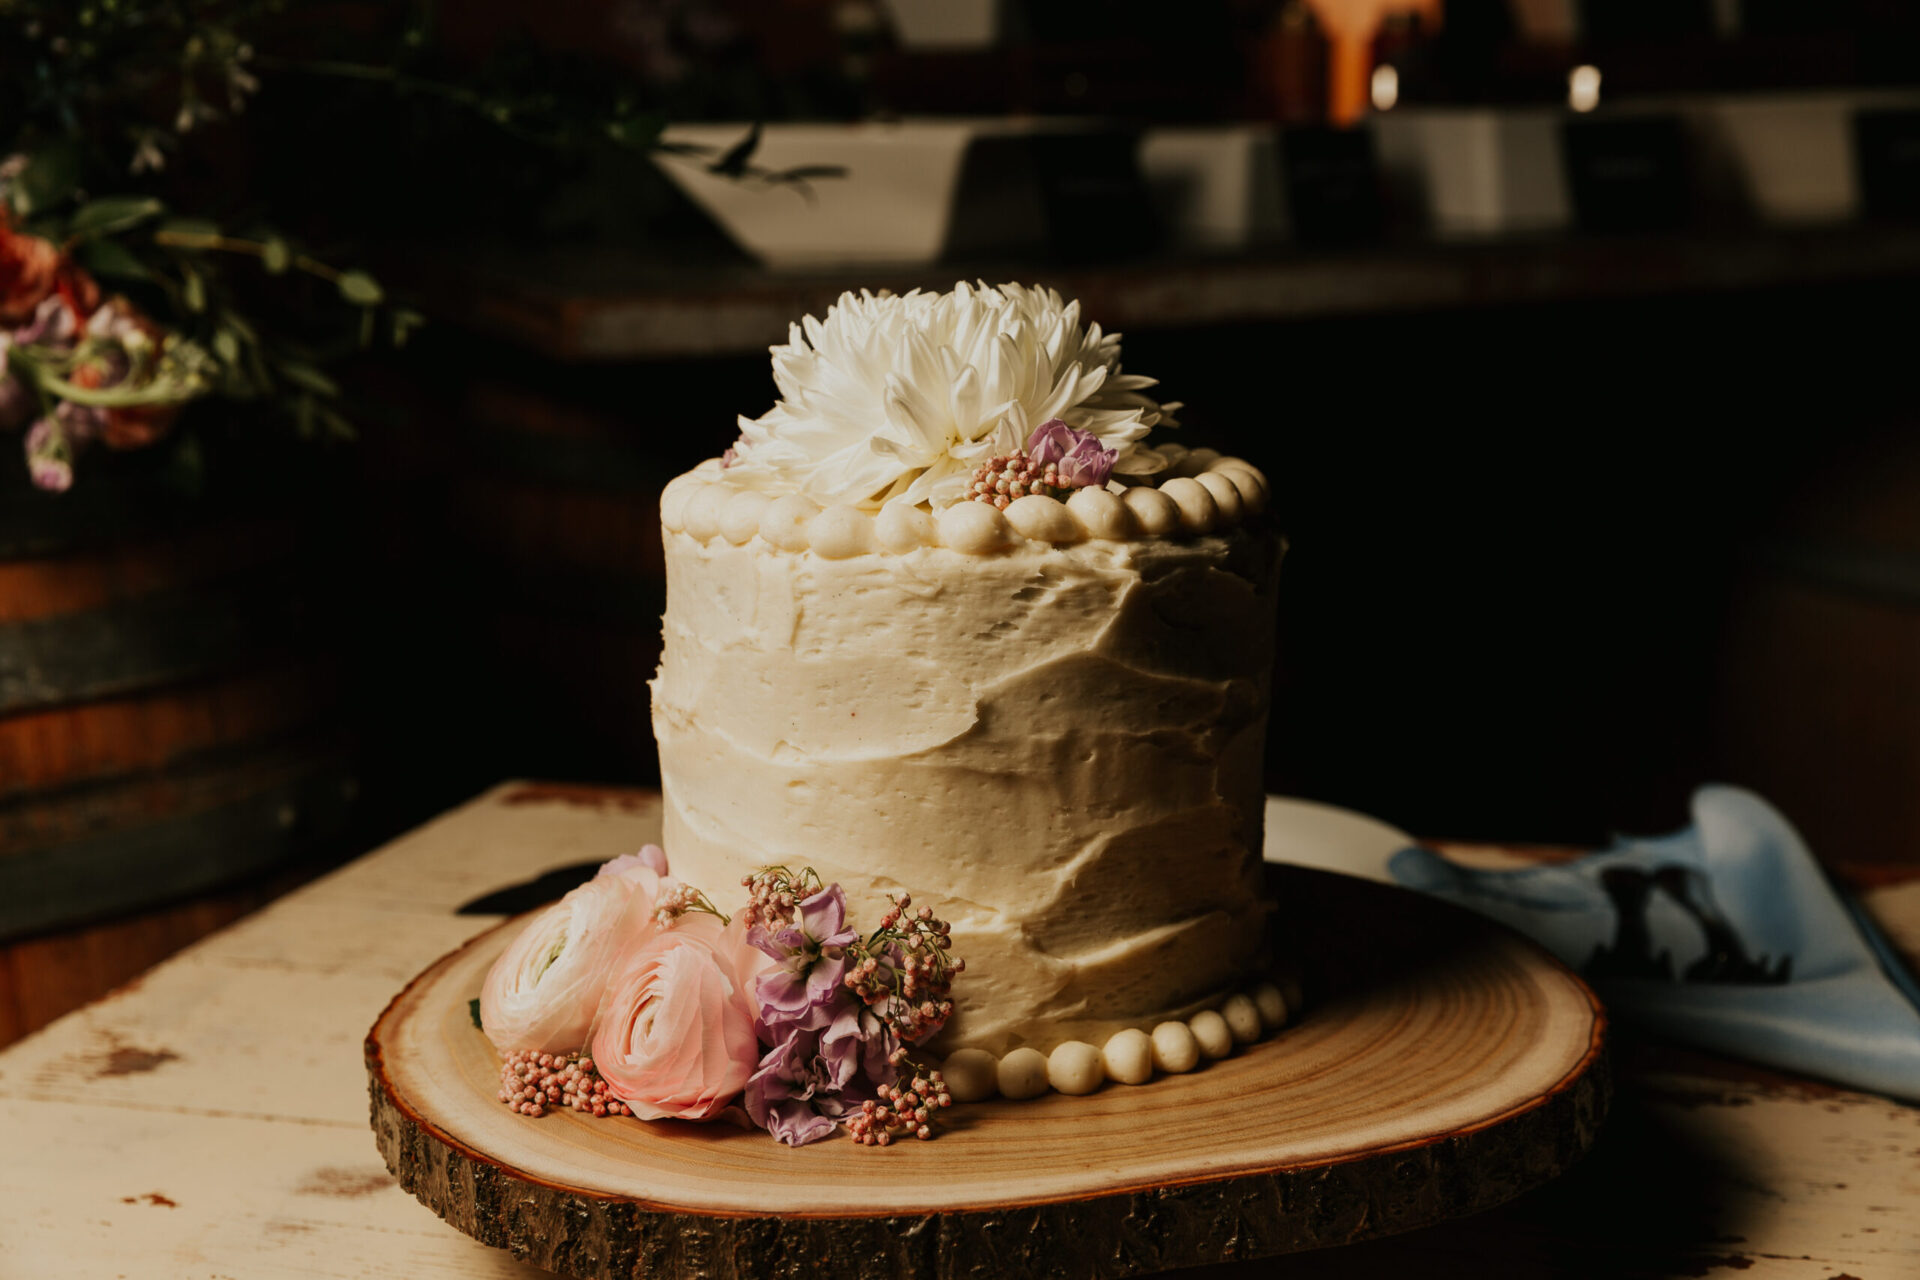 Zion Springs wedding cake with fresh flowers and white frosting